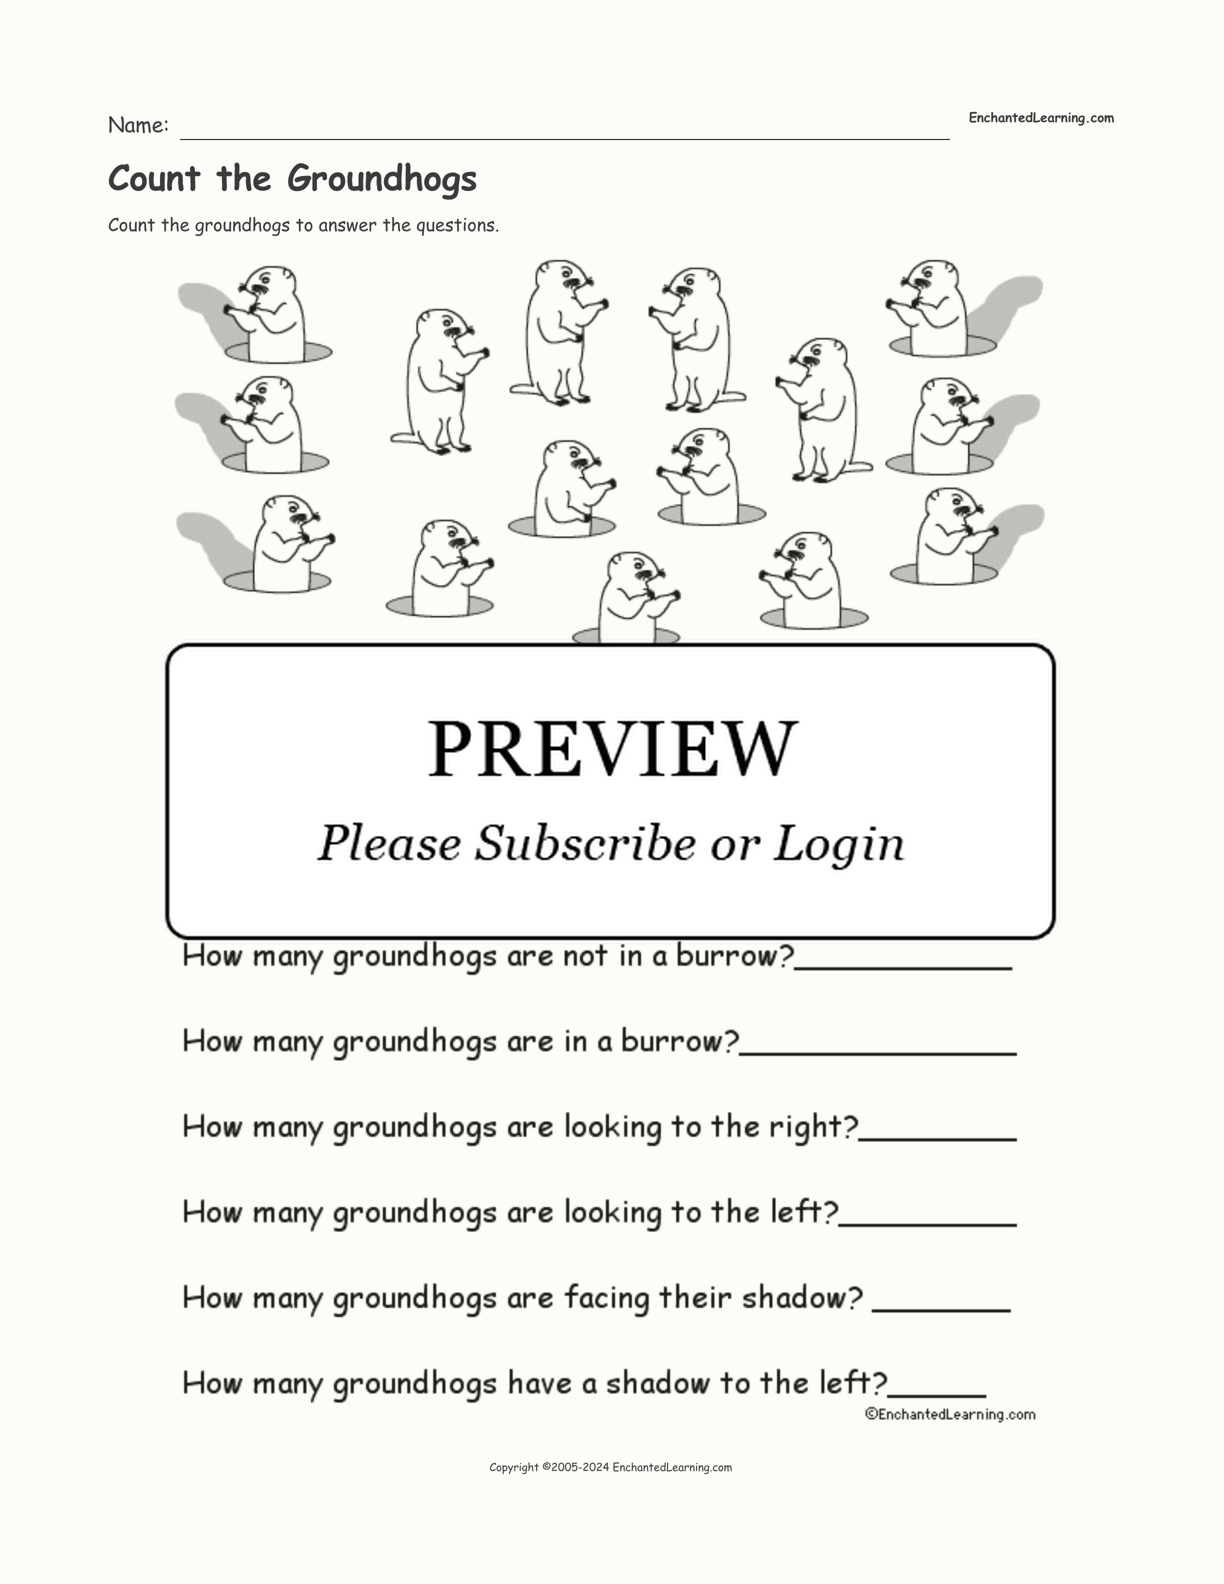 Count the Groundhogs interactive worksheet page 1